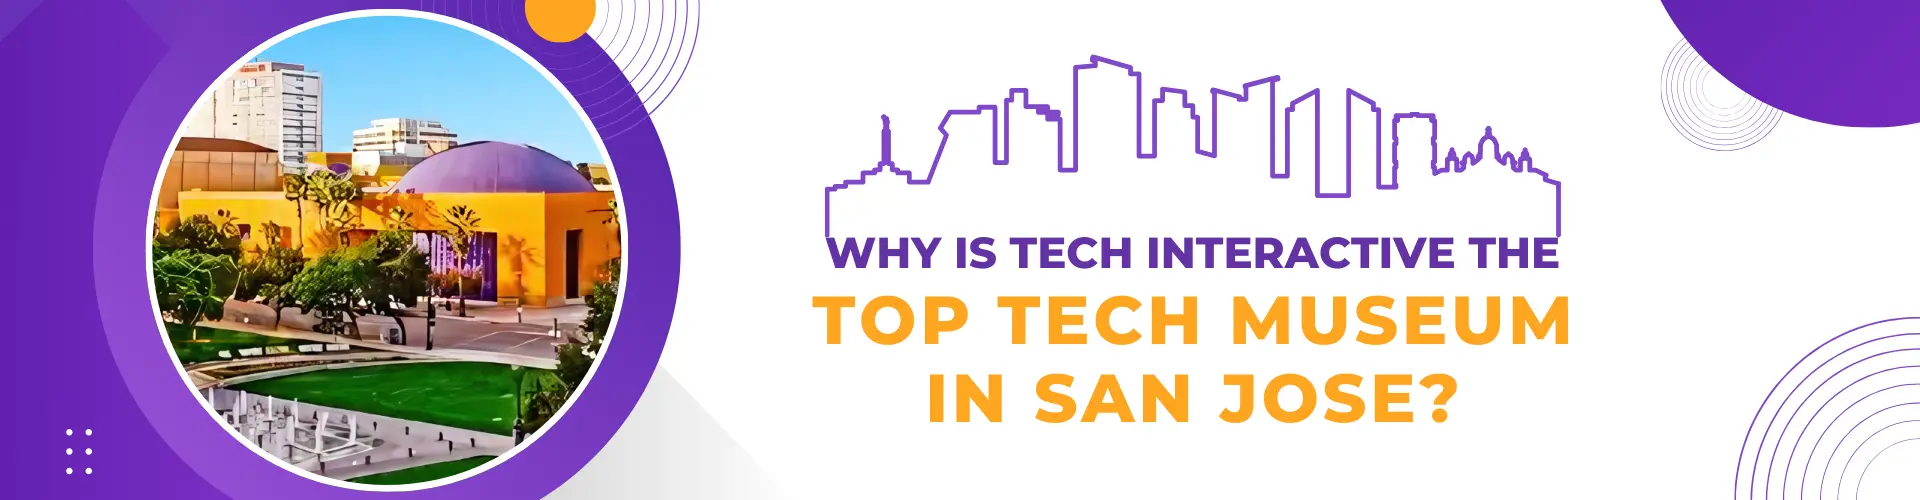 Why Is Tech Interactive The Top Tech Museum in San Jose?